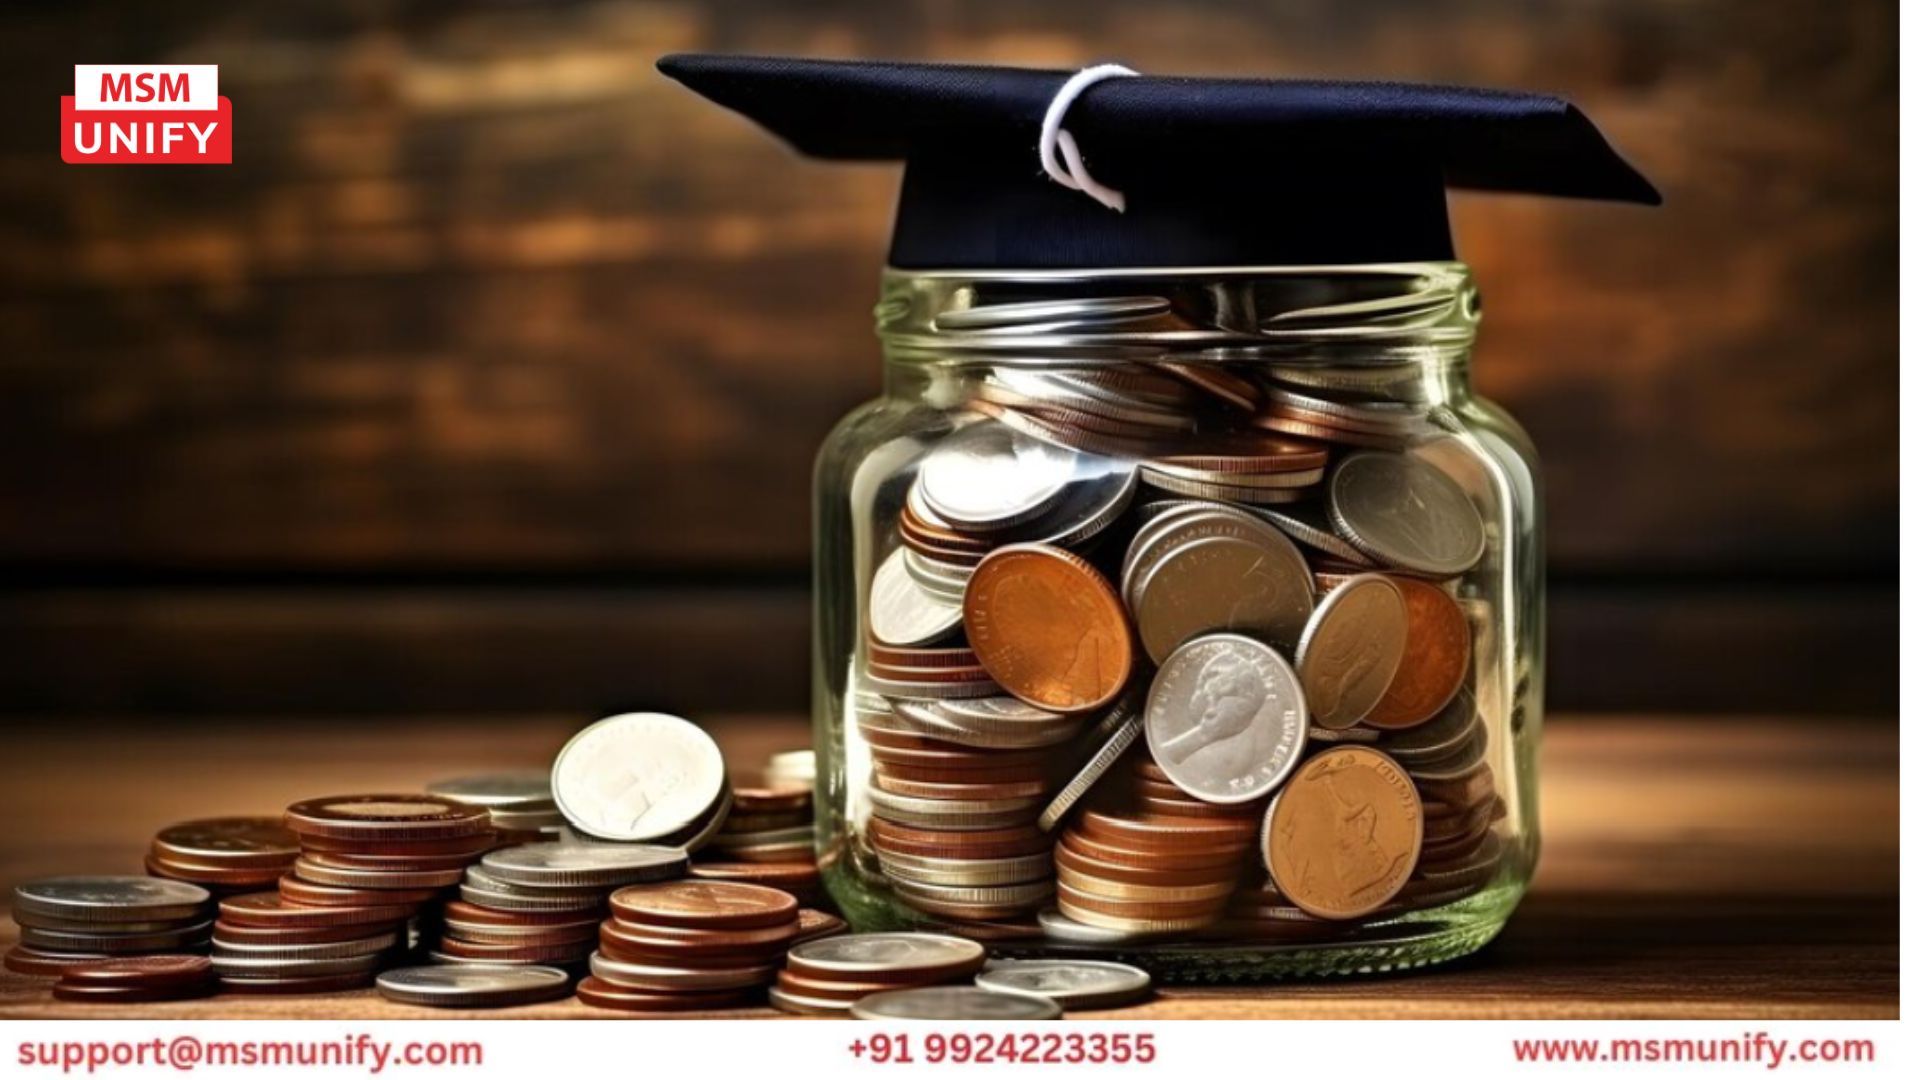 Explore hassle-free <a href="https://www.msmunify.com/blogs/how-to-get-an-education-loan-without-collateral-for-studying-abroad/">education loan without collateral</a>. Unlock financial support for your academic journey. Simple process, no security required. Invest in your education stress-free.
